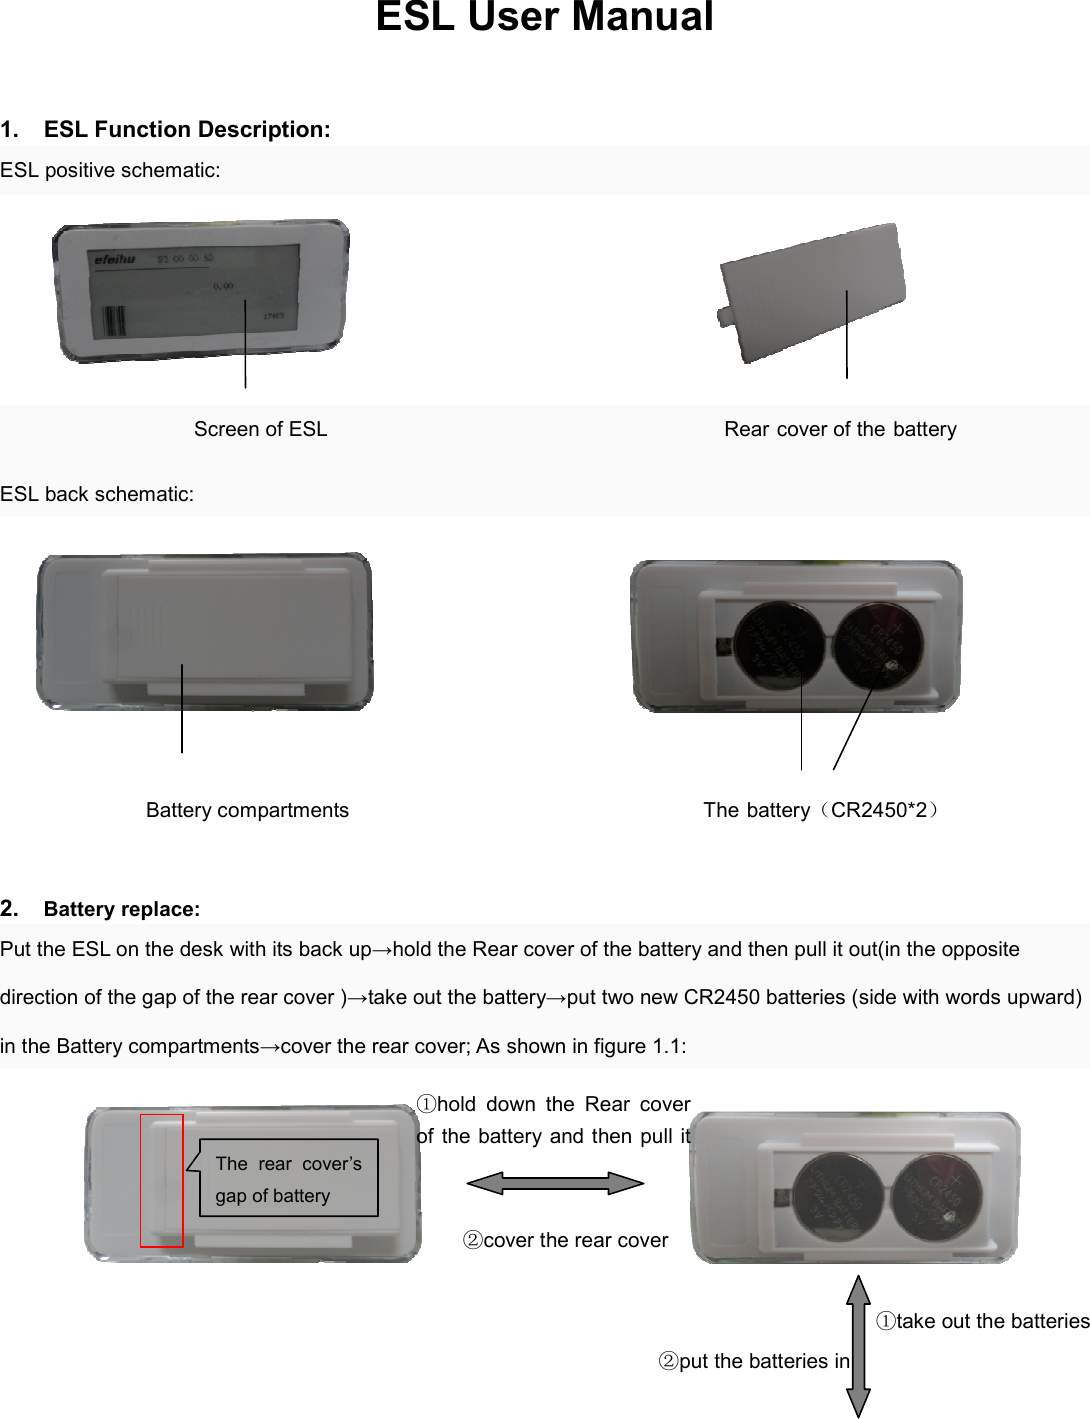 ESL User Manual    1.  ESL Function Description: ESL positive schematic:                                                      Screen of ESL                                      Rear cover of the battery   ESL back schematic:                                                         Battery compartments                                                                    The battery（CR2450*2）  2. Battery replace: Put the ESL on the desk with its back up→hold the Rear cover of the battery and then pull it out(in the opposite direction of the gap of the rear cover )→take out the battery→put two new CR2450 batteries (side with words upward) in the Battery compartments→cover the rear cover; As shown in figure 1.1:                                      The  rear  cover’s gap of battery ①hold  down  the  Rear  cover of the battery and then pull it ②cover the rear cover ②put the batteries in  ①take out the batteries 